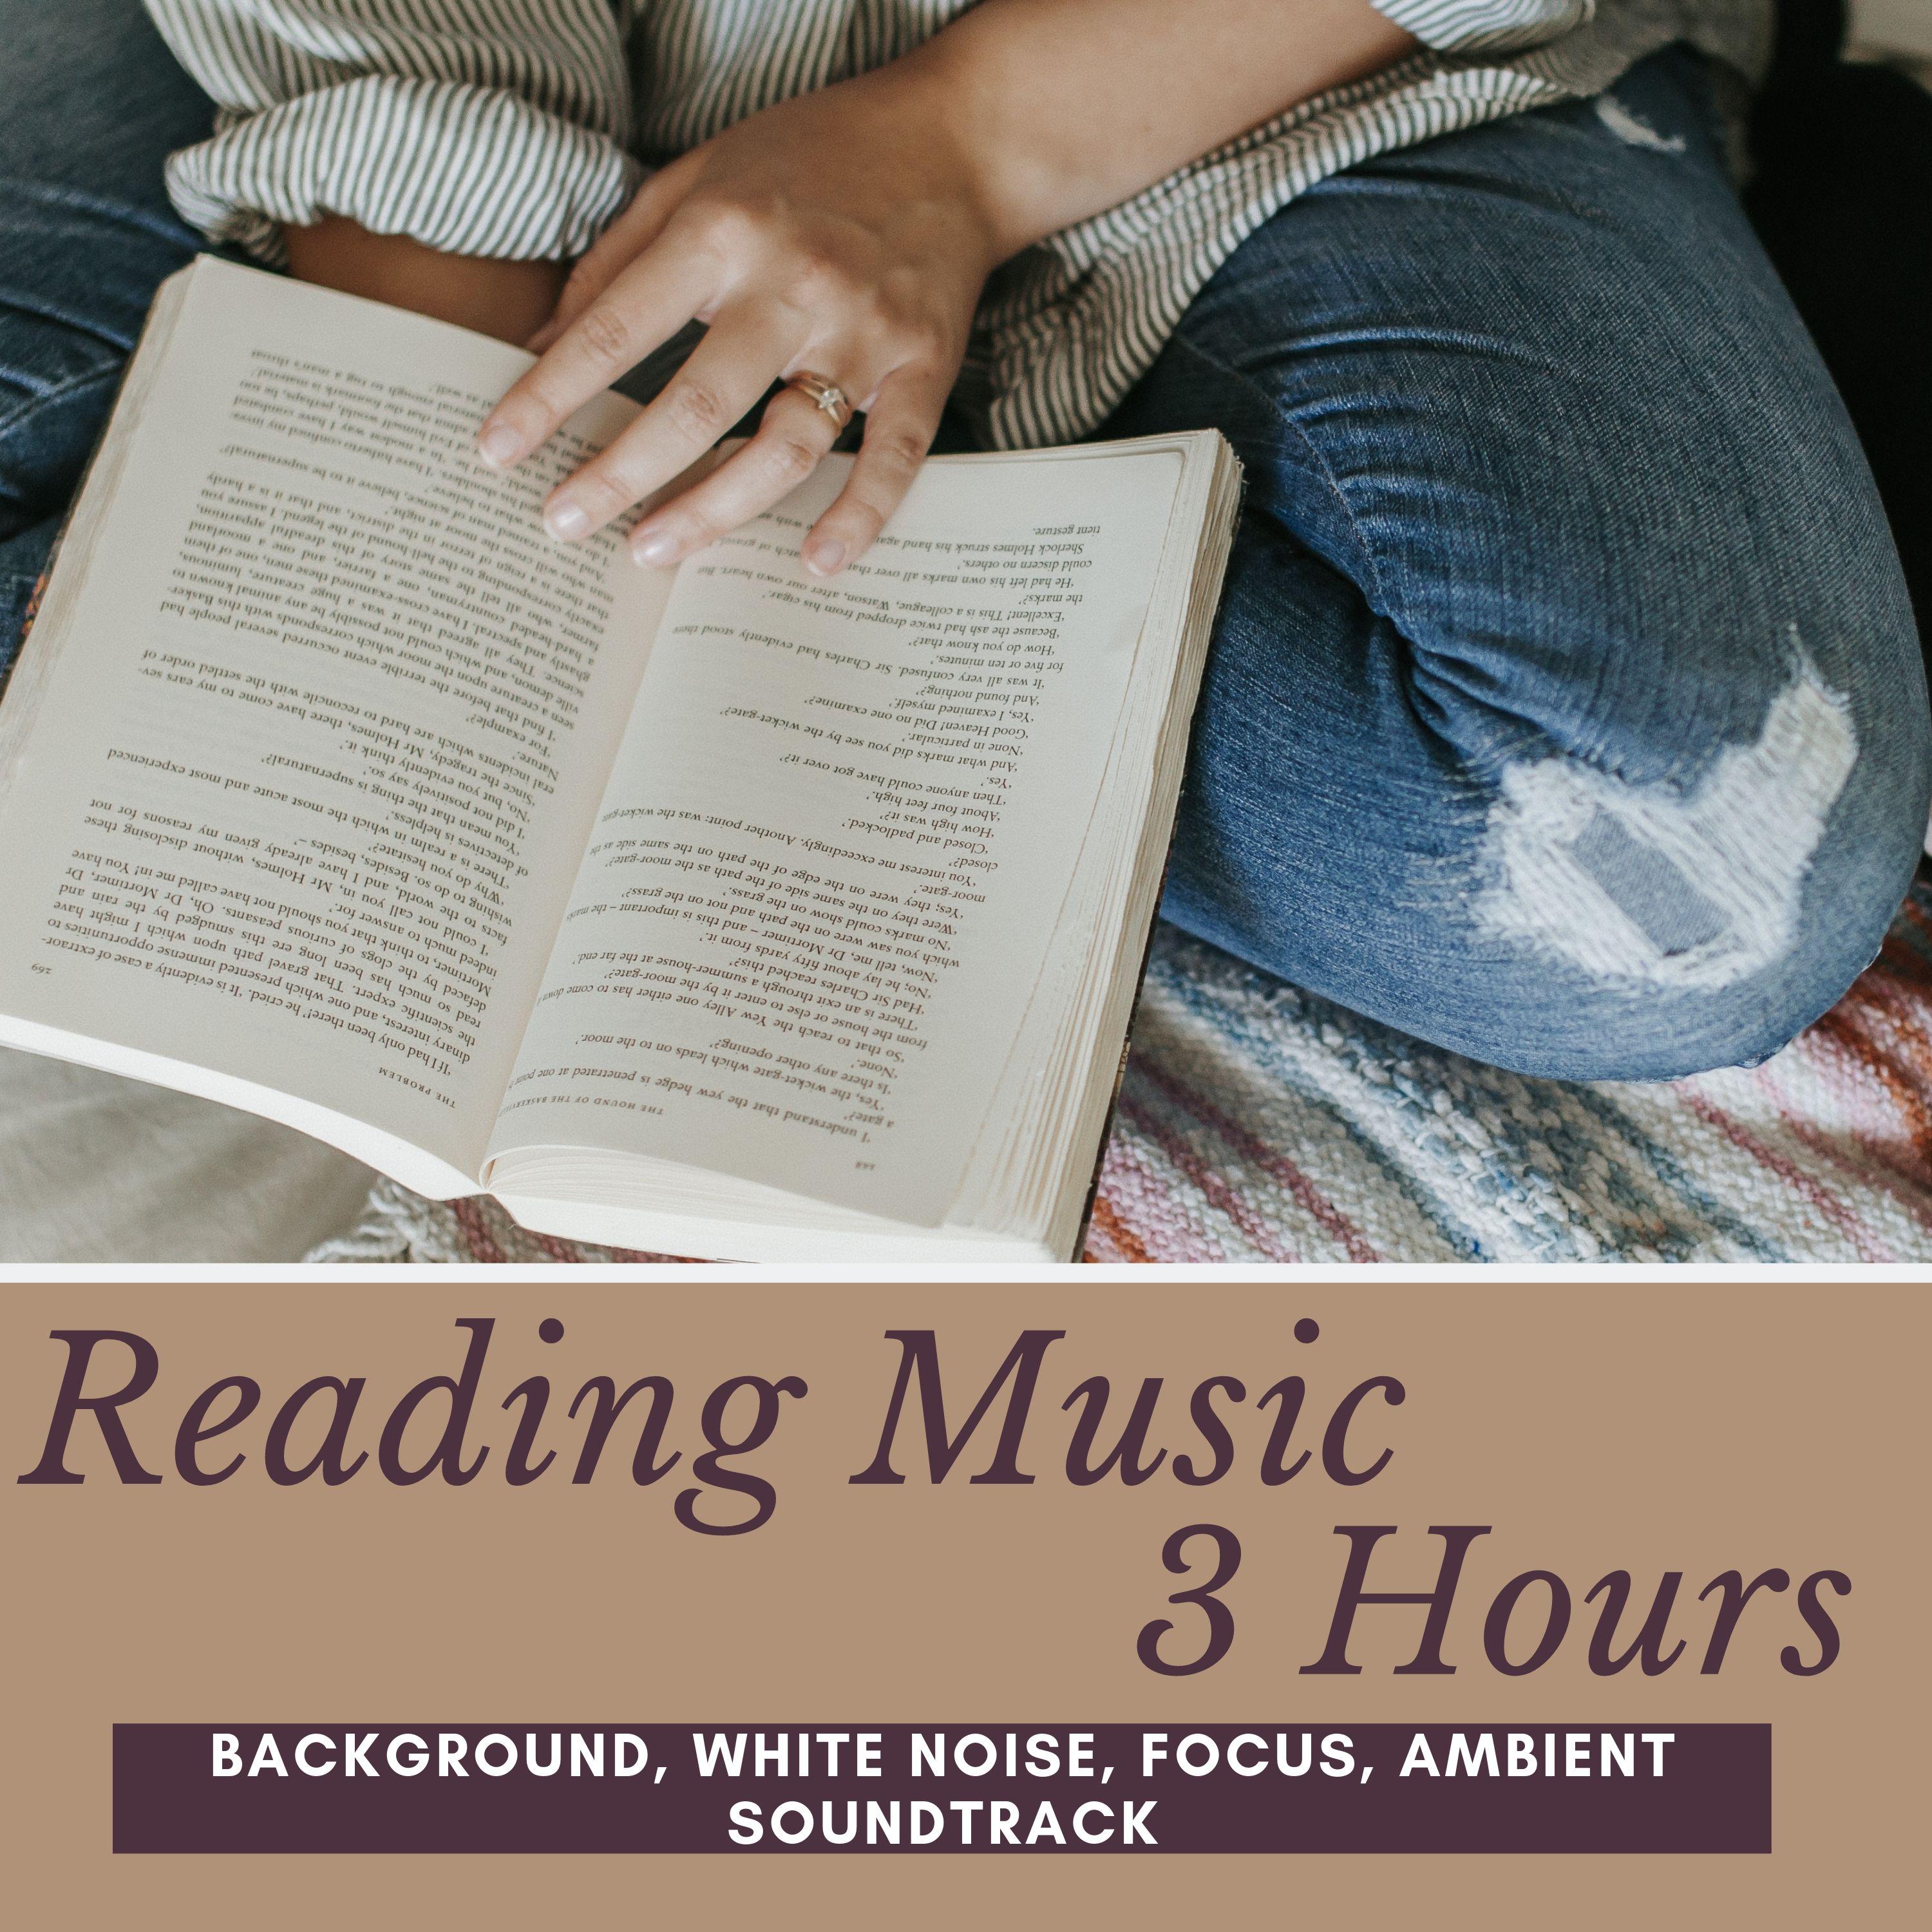 Reading Music 3 Hours: Background, White Noise, Focus, Ambient Soundtrack